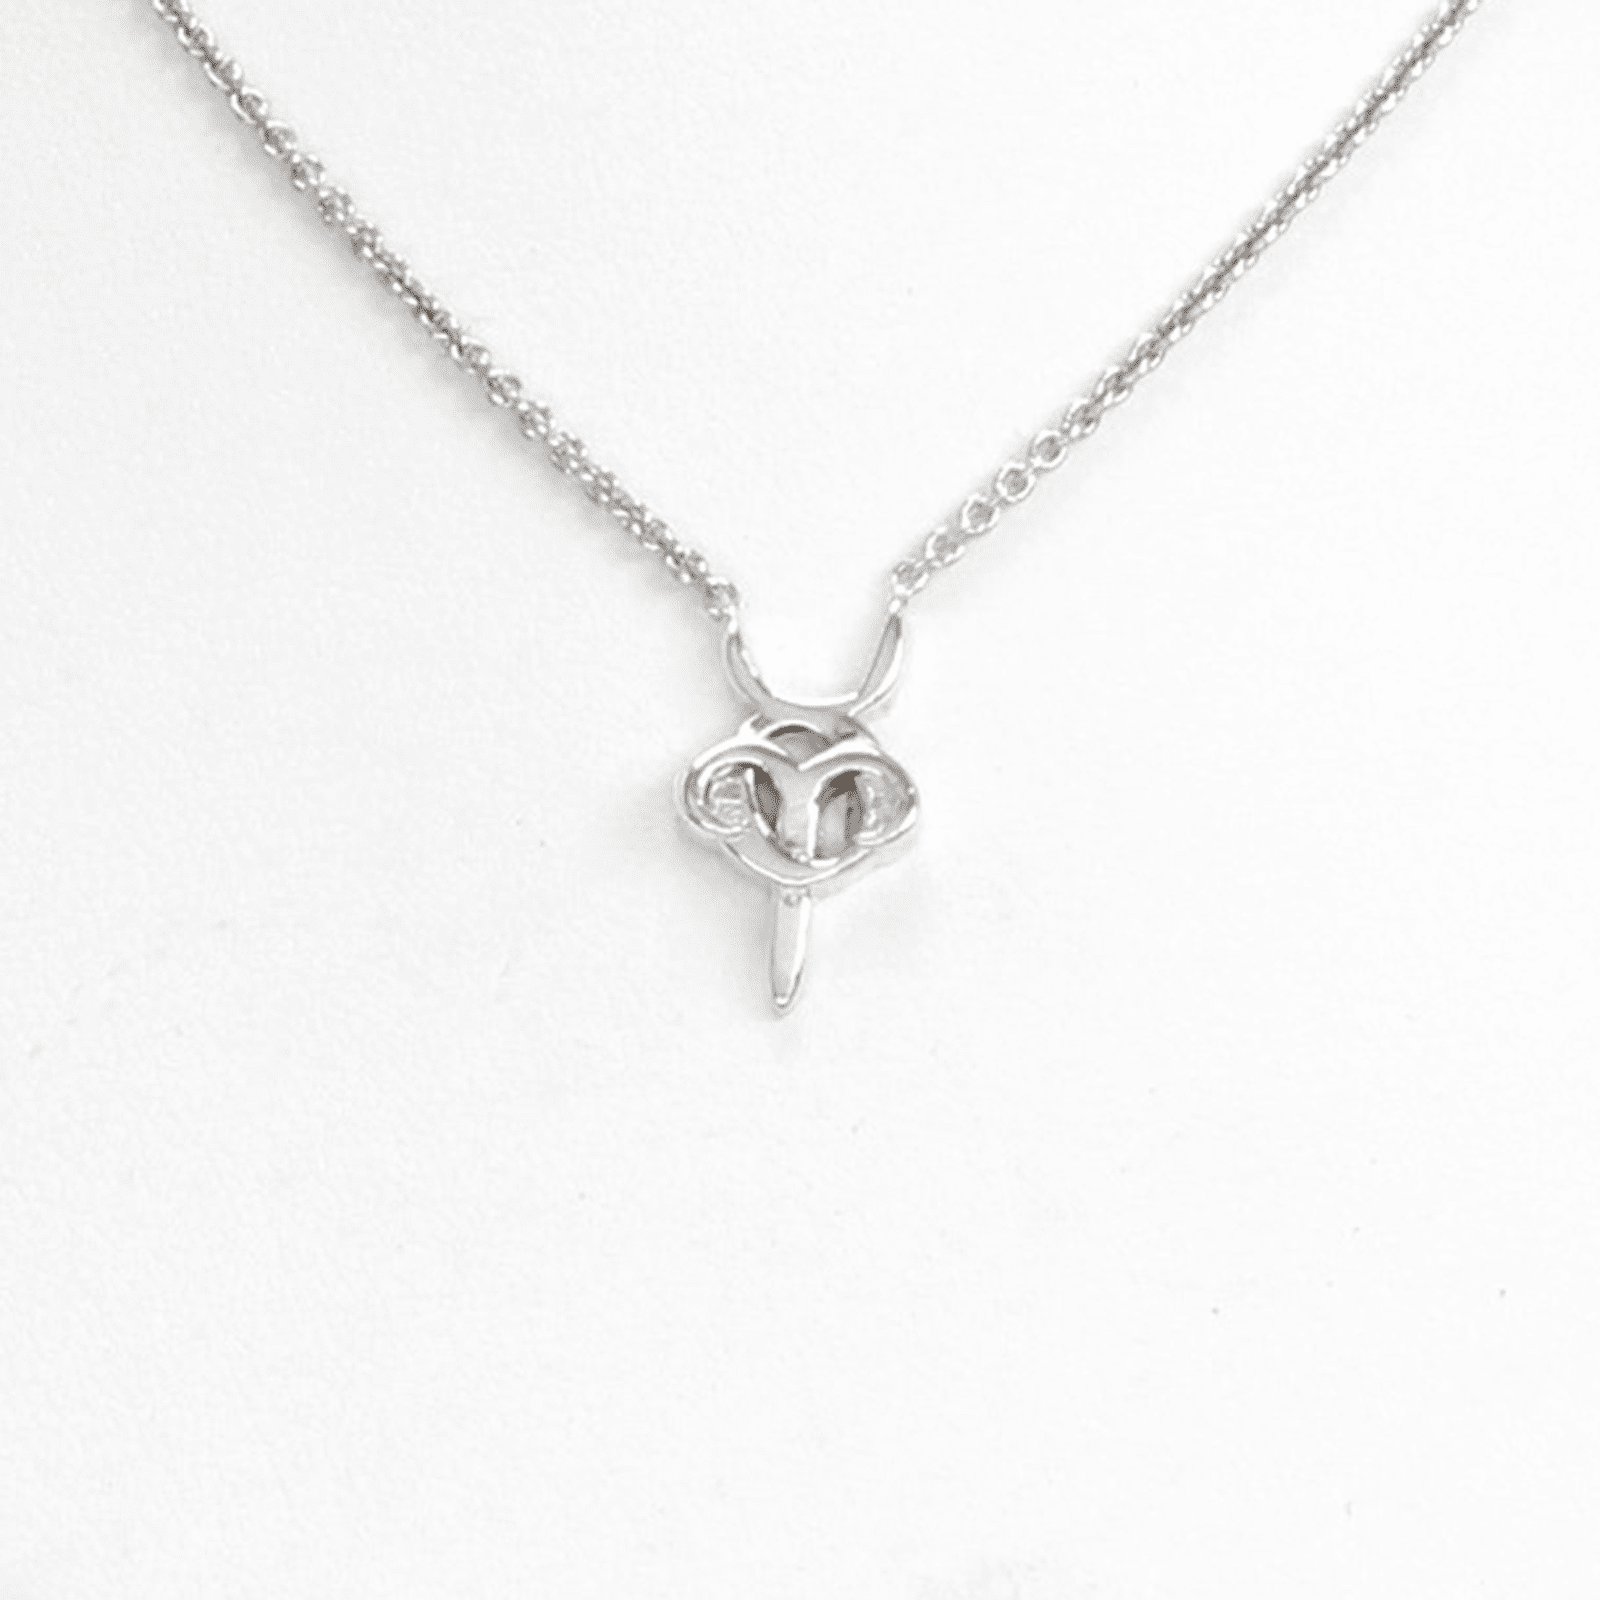 Aries and Taurus Necklace